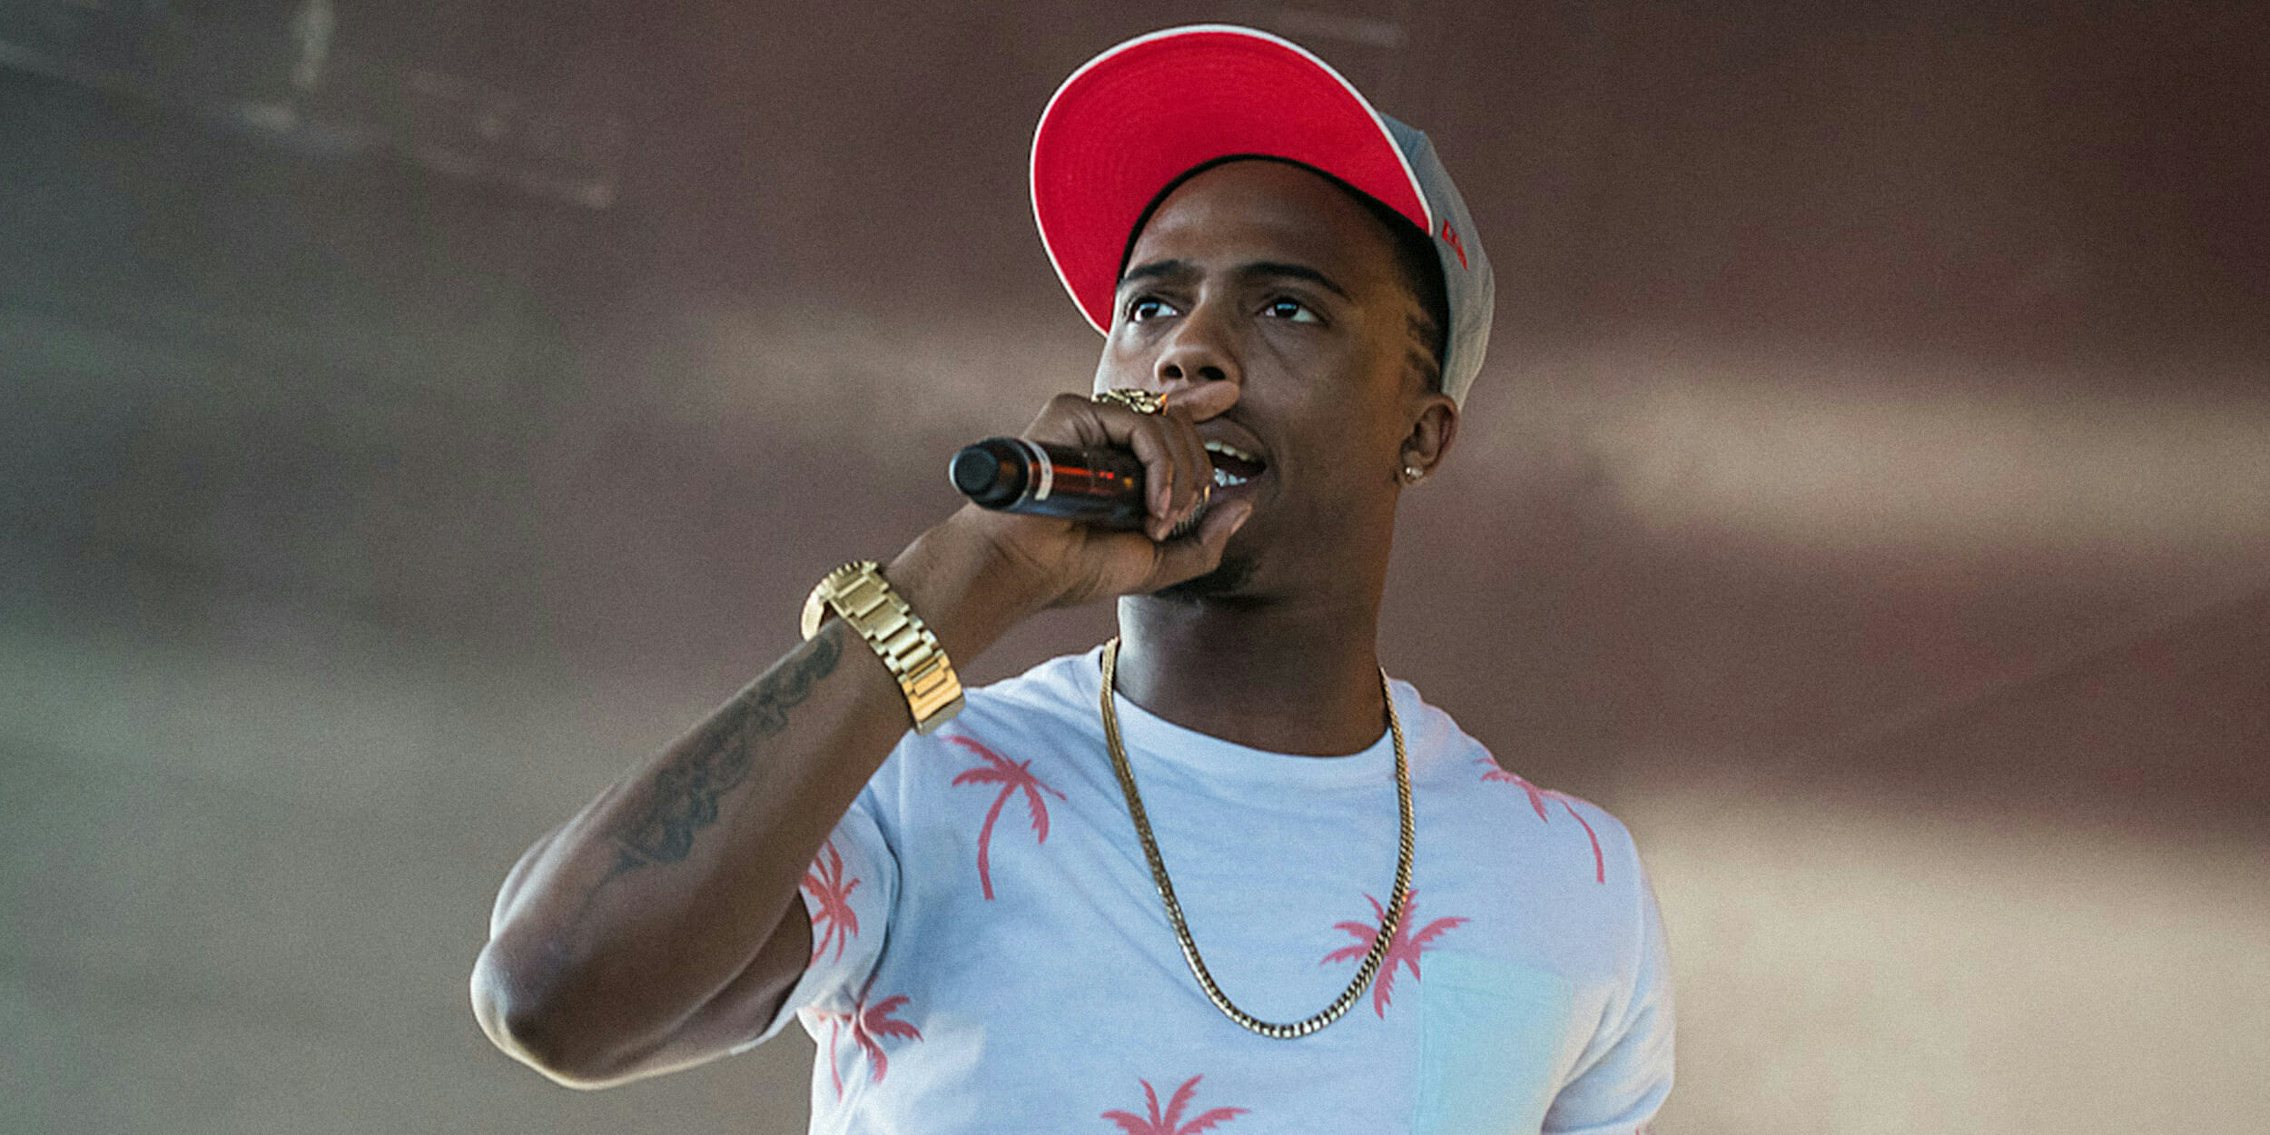 B.o.B. with microphone on stage